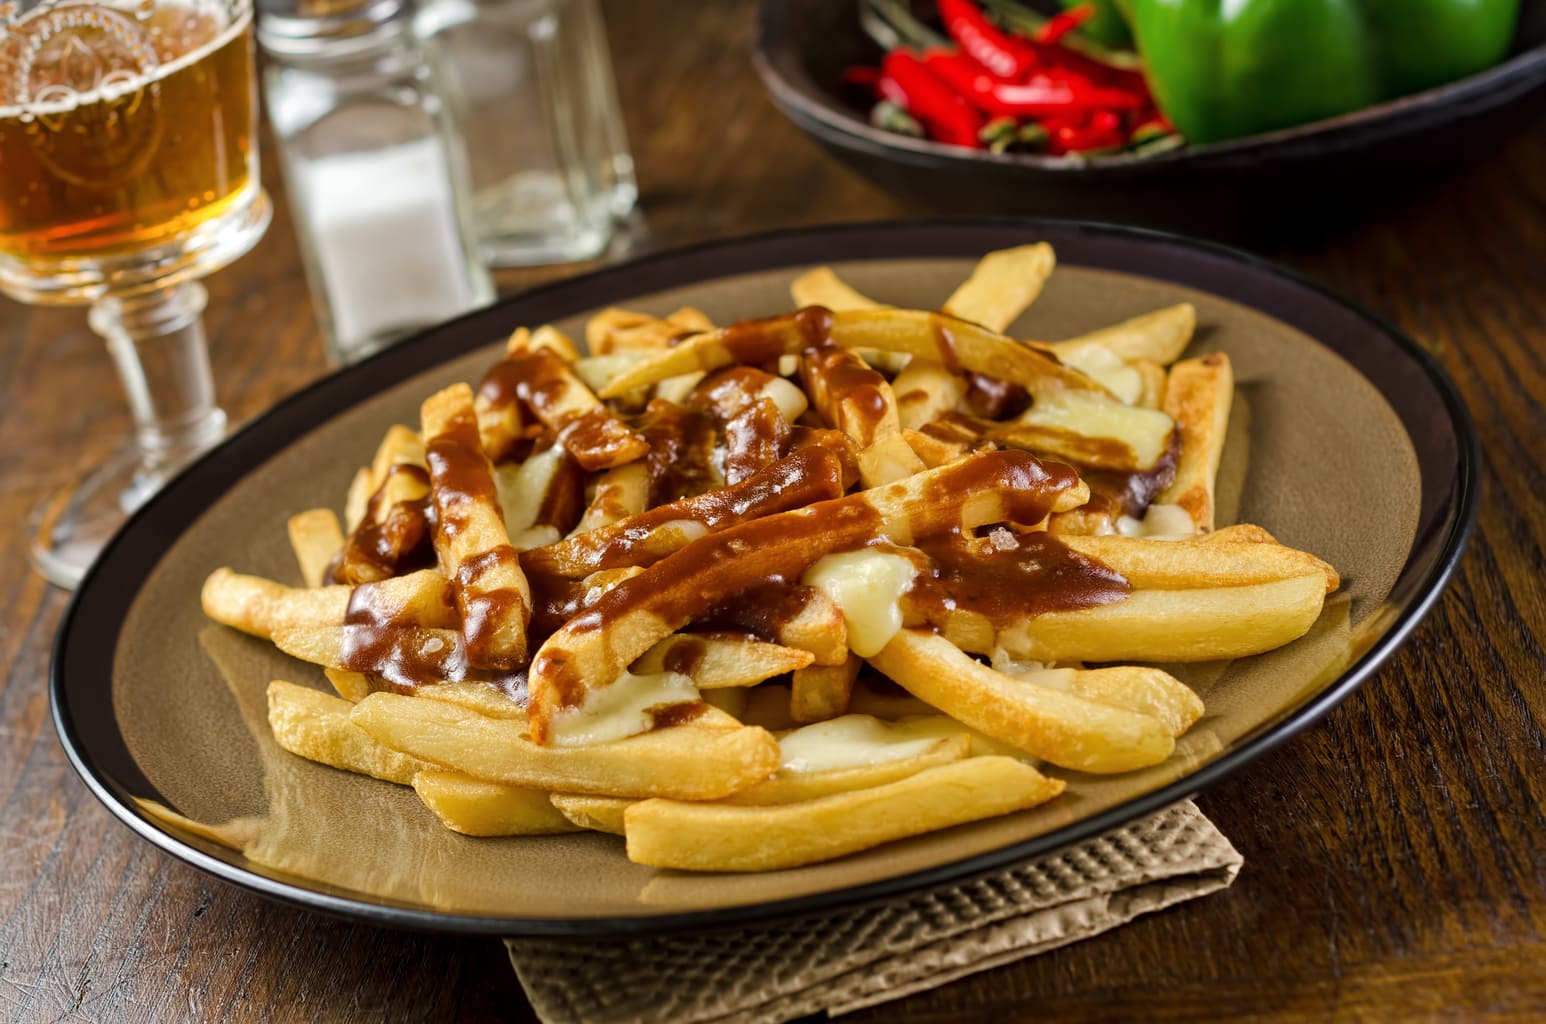 Can You Conquer All 7 Continents in This 30-Question Quiz? Poutine